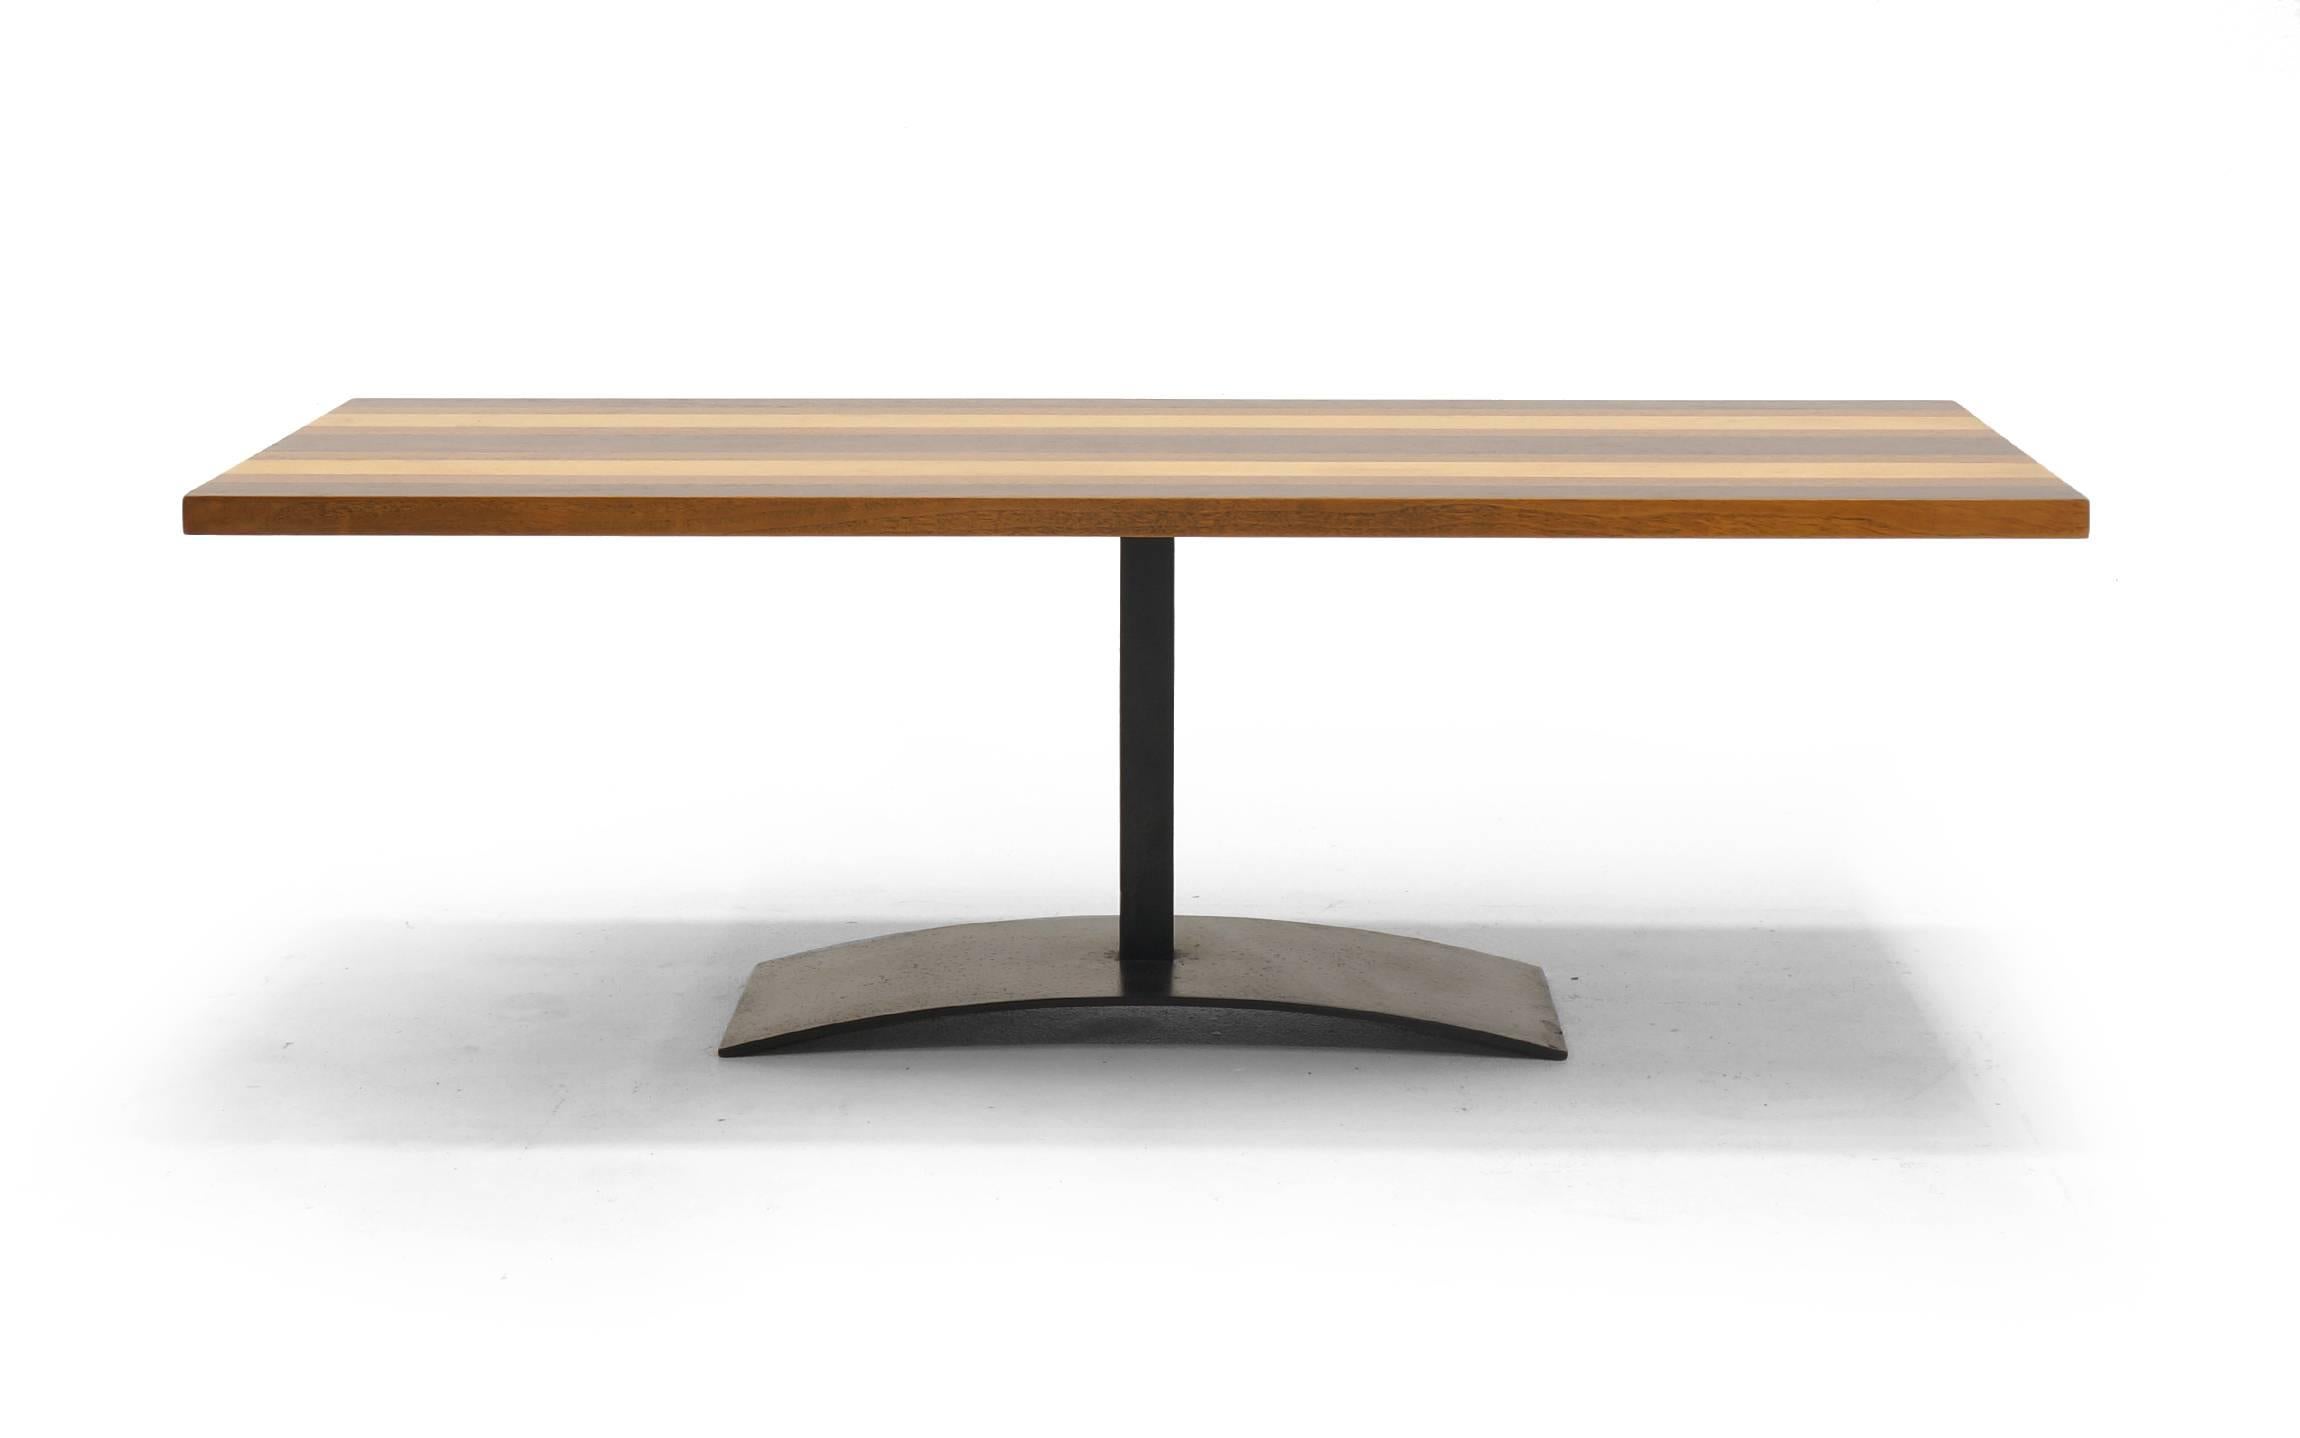 Milo Baughman coffee or cocktail table in a stunning mix of rosewood, walnut and oak. We have seen the dining table version of this design, but never the coffee table. Rectangular top with the original sculptural iron base.  Manufactured by